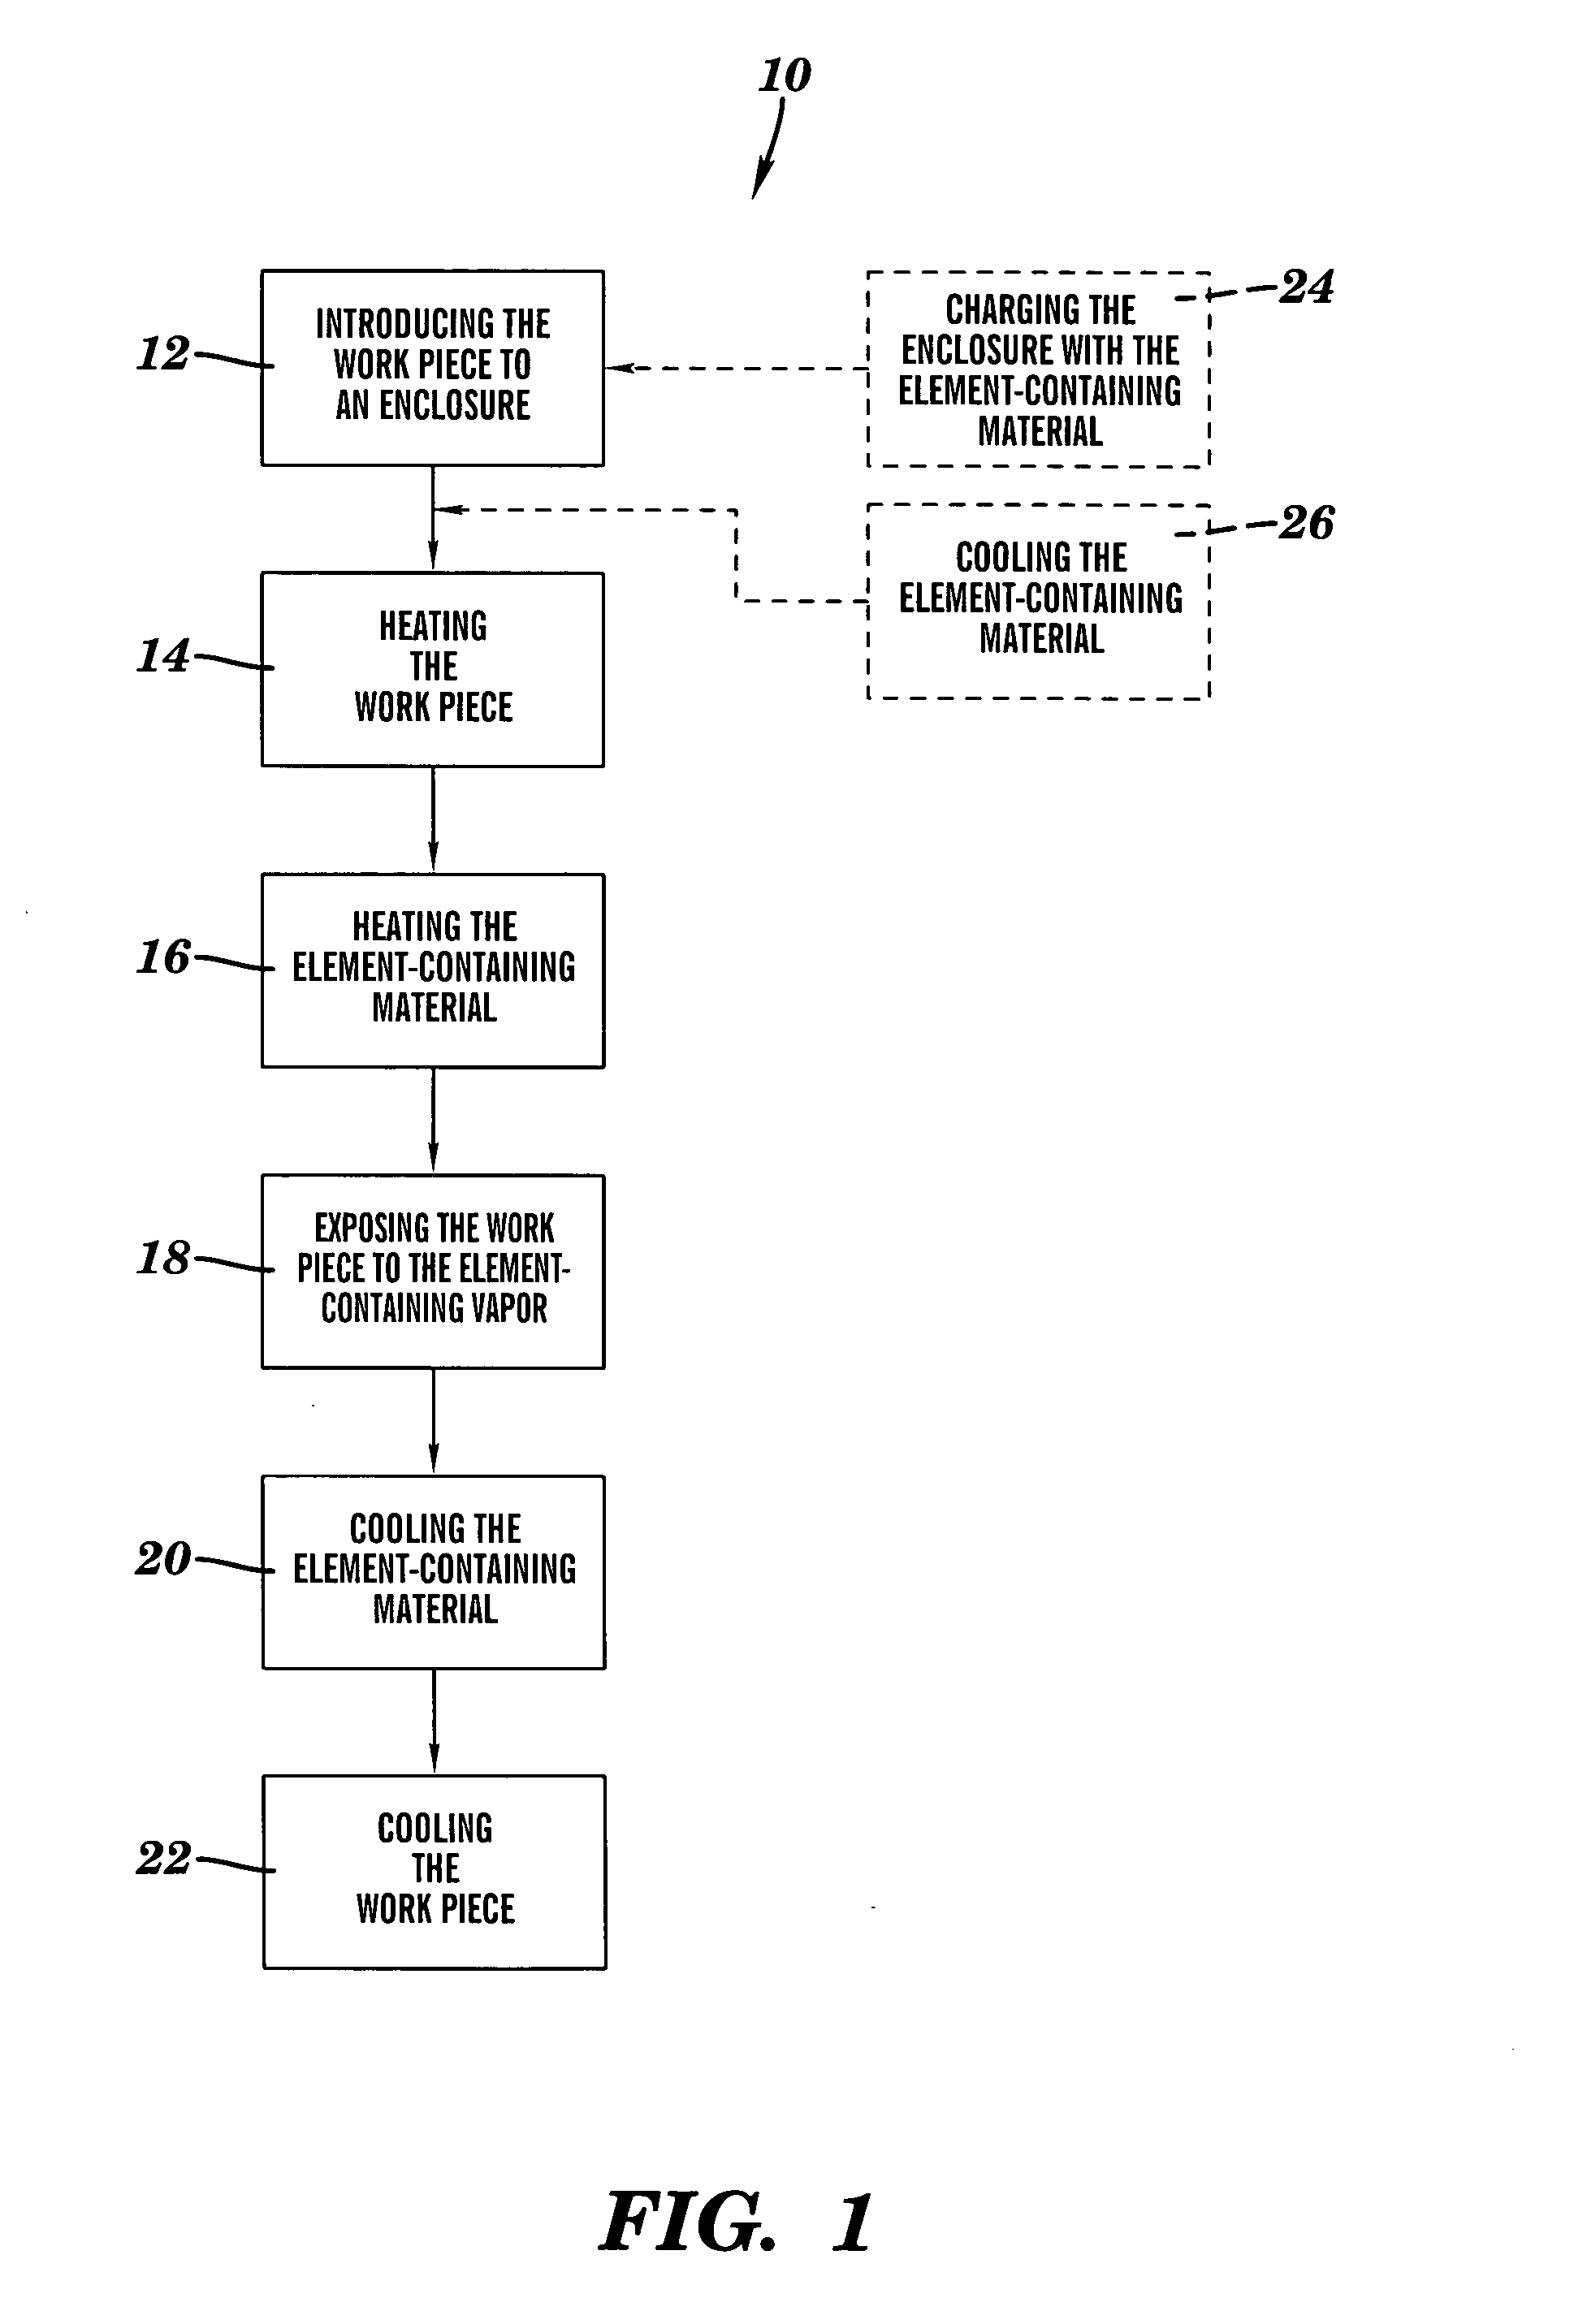 Methods and apparatus for treating a work piece with a vaporous element